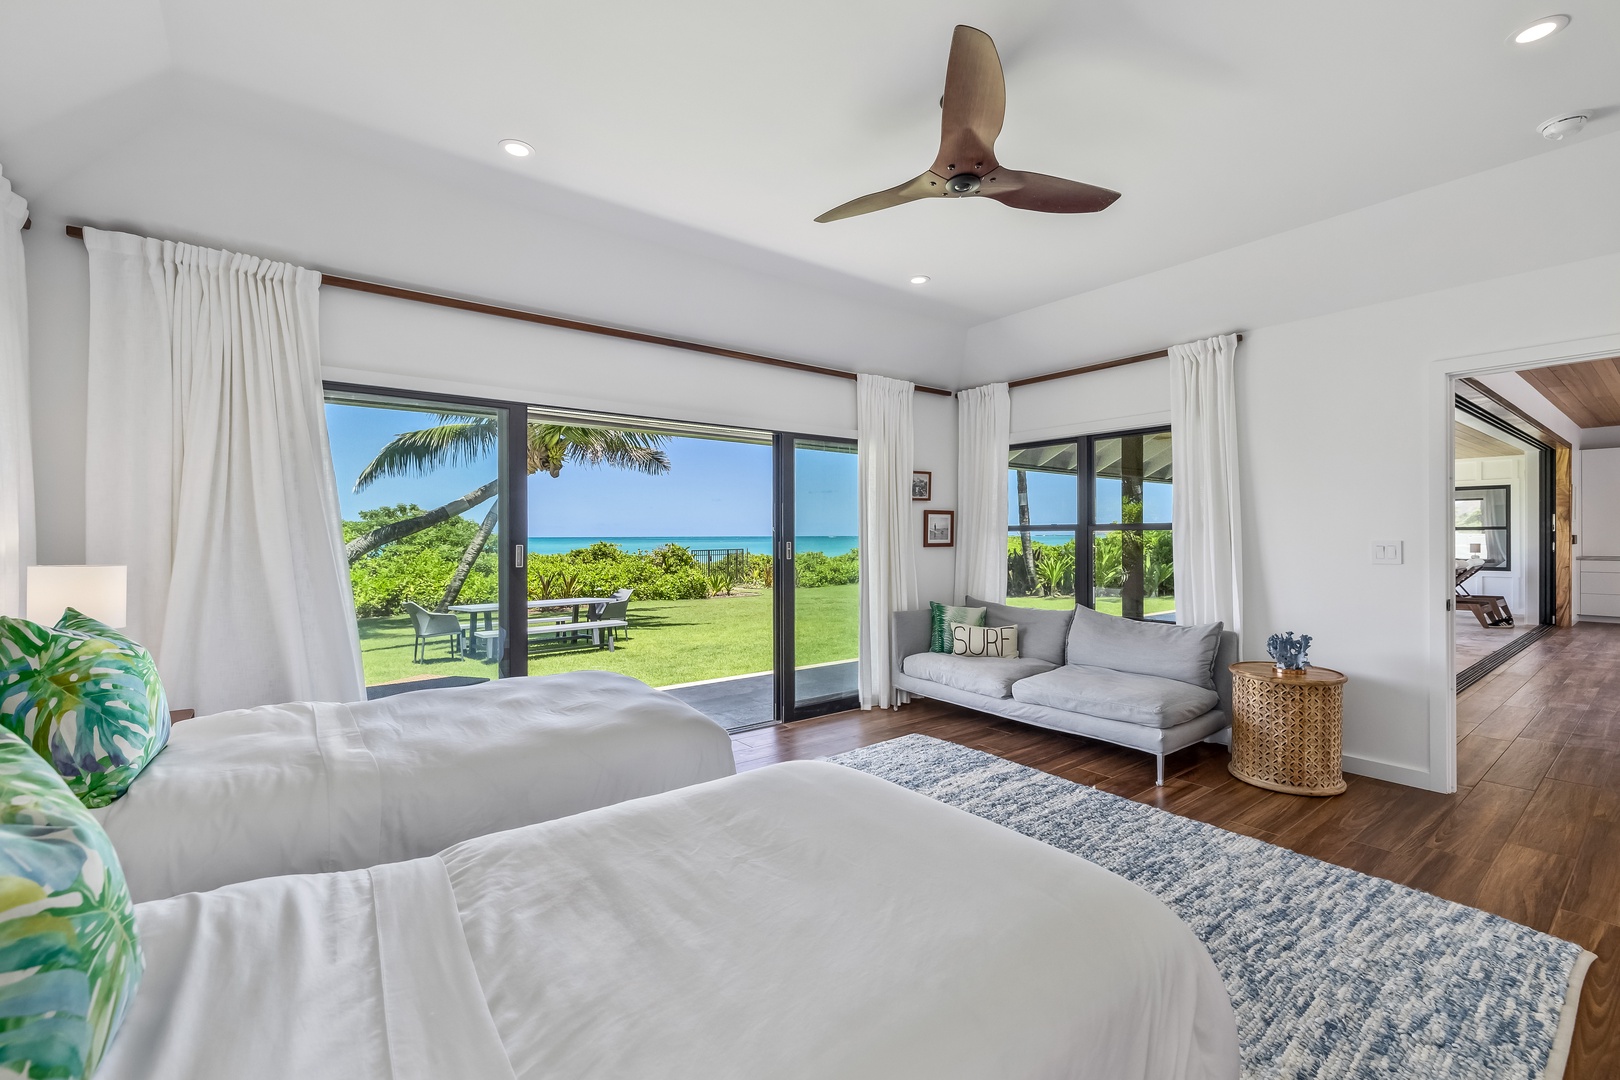 Kailua Vacation Rentals, Kailua Beach Villa - Relax and feel the breeze at Makai North suite with easy outdoor access through sliding doors.